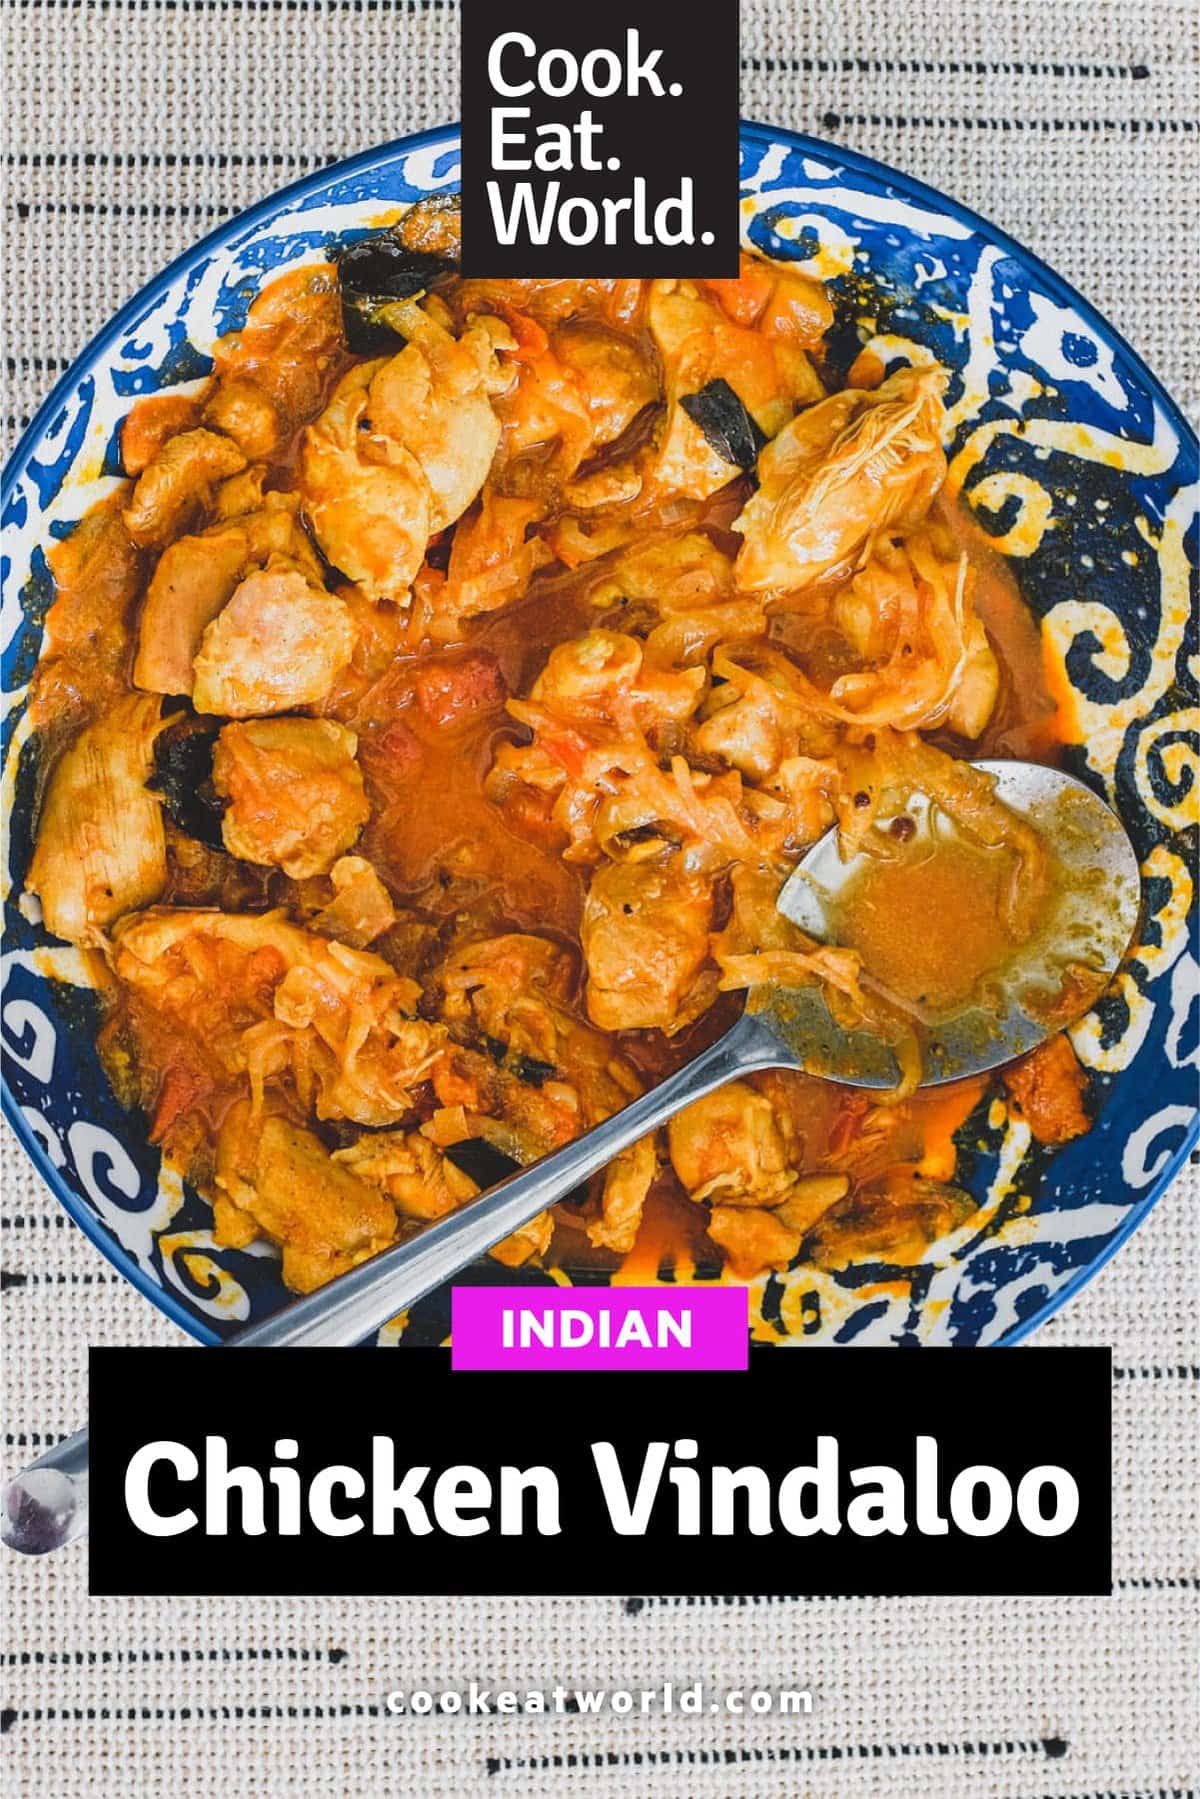 Chicken cooked with vinegar. spices, garlic and tomato.